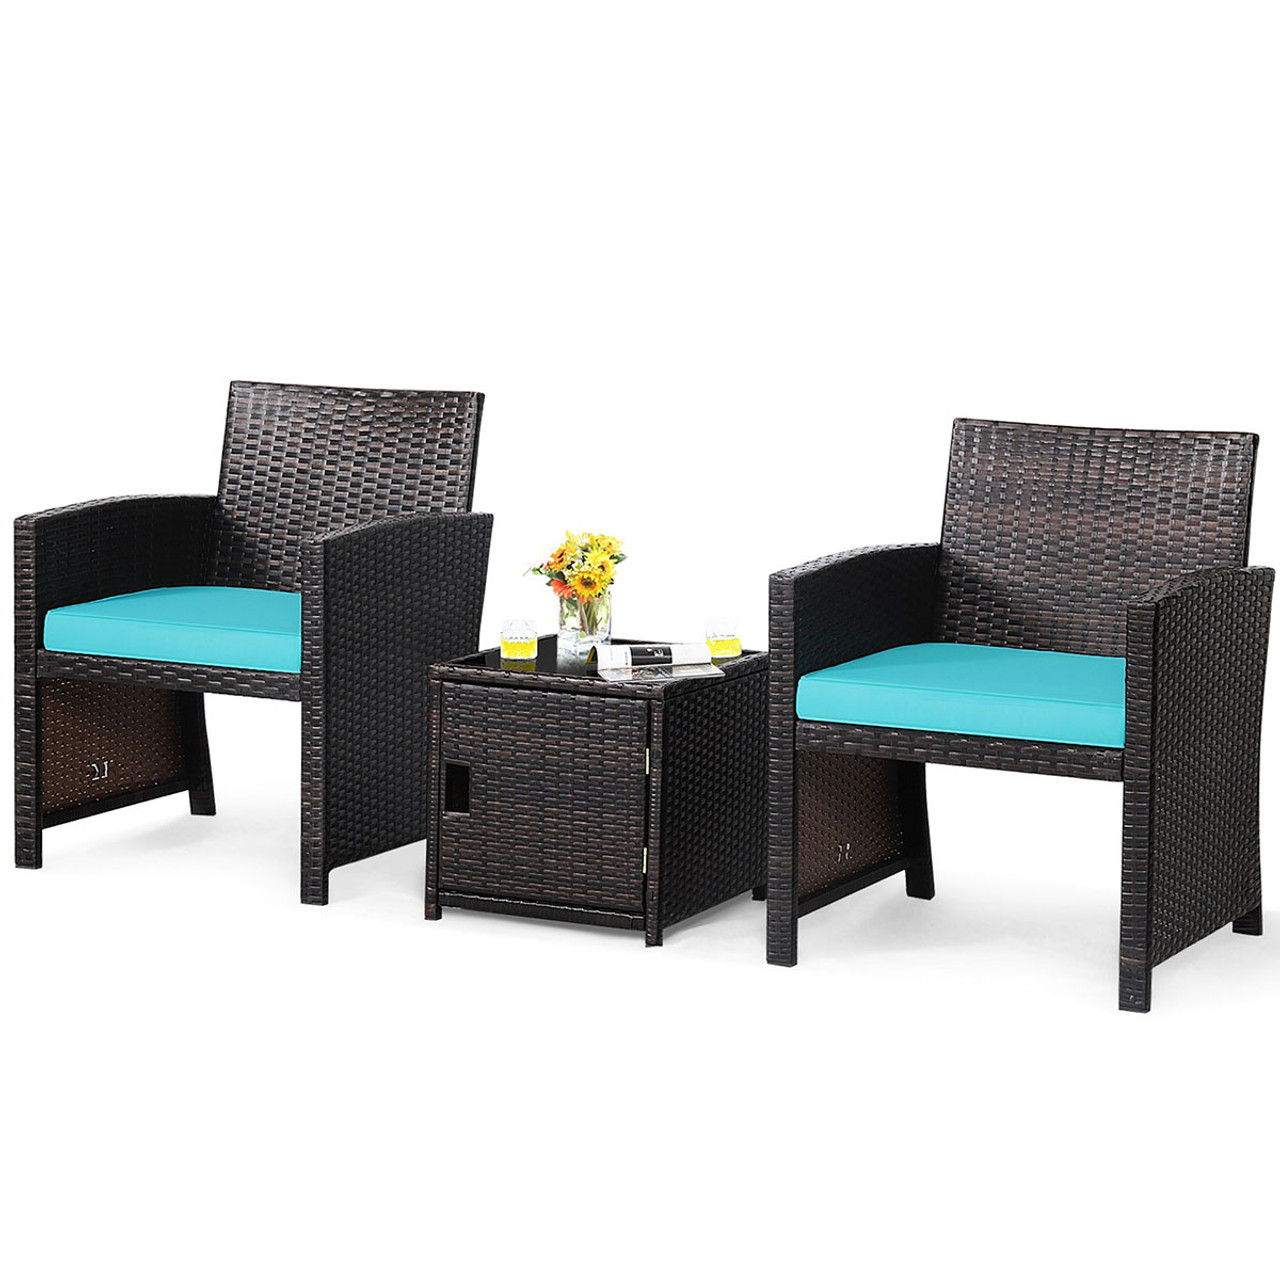 3-Piece Patio PE Rattan Conversation Bistro Furniture Set with Waterproof Covers product image